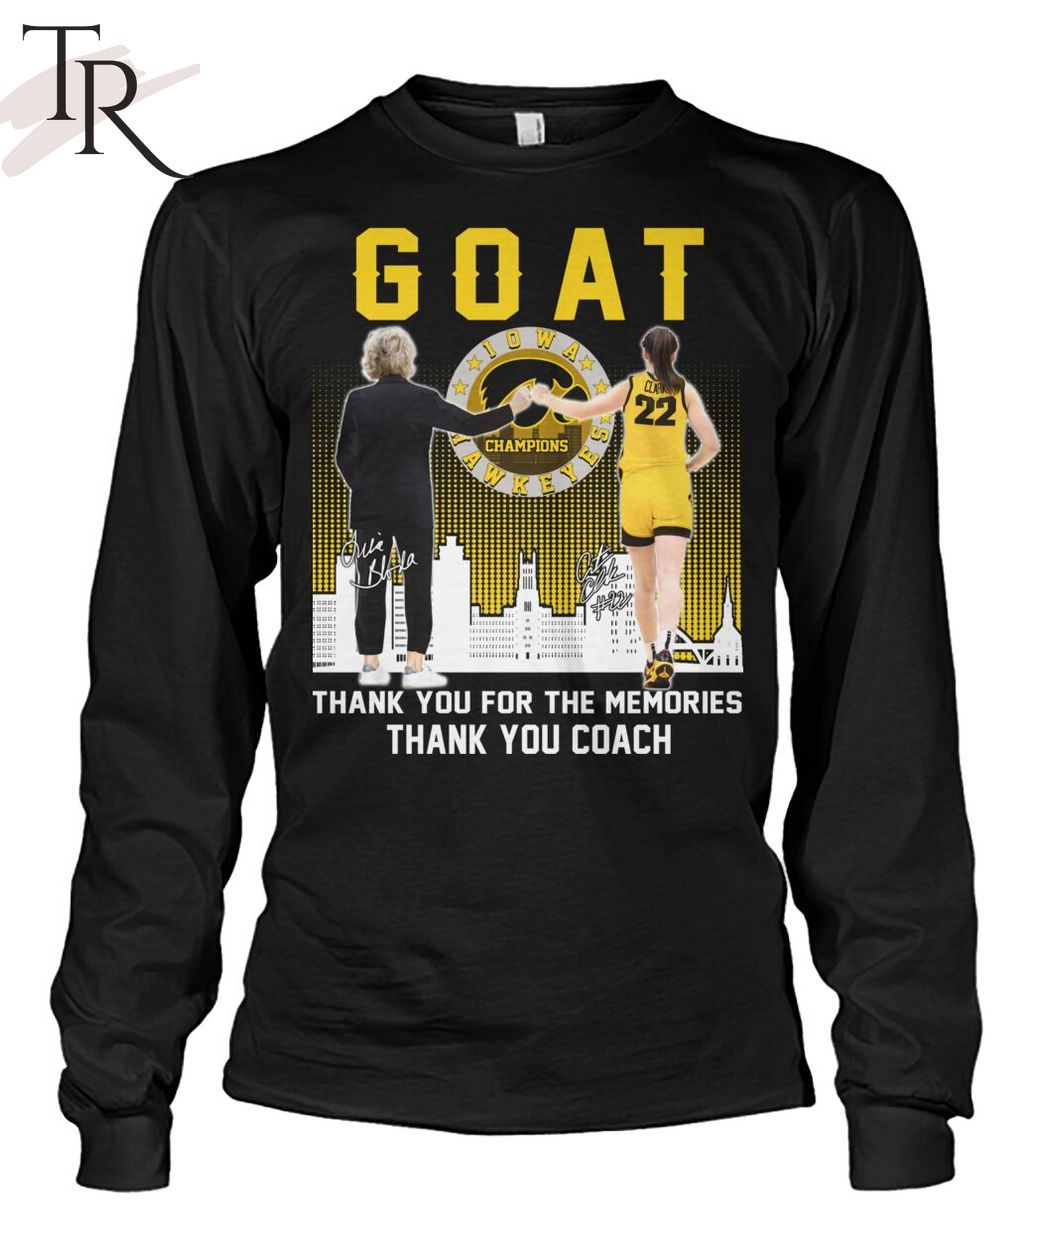 GOAT Lisa Bluder Thank You For The Memories Thank You Coach T-Shirt